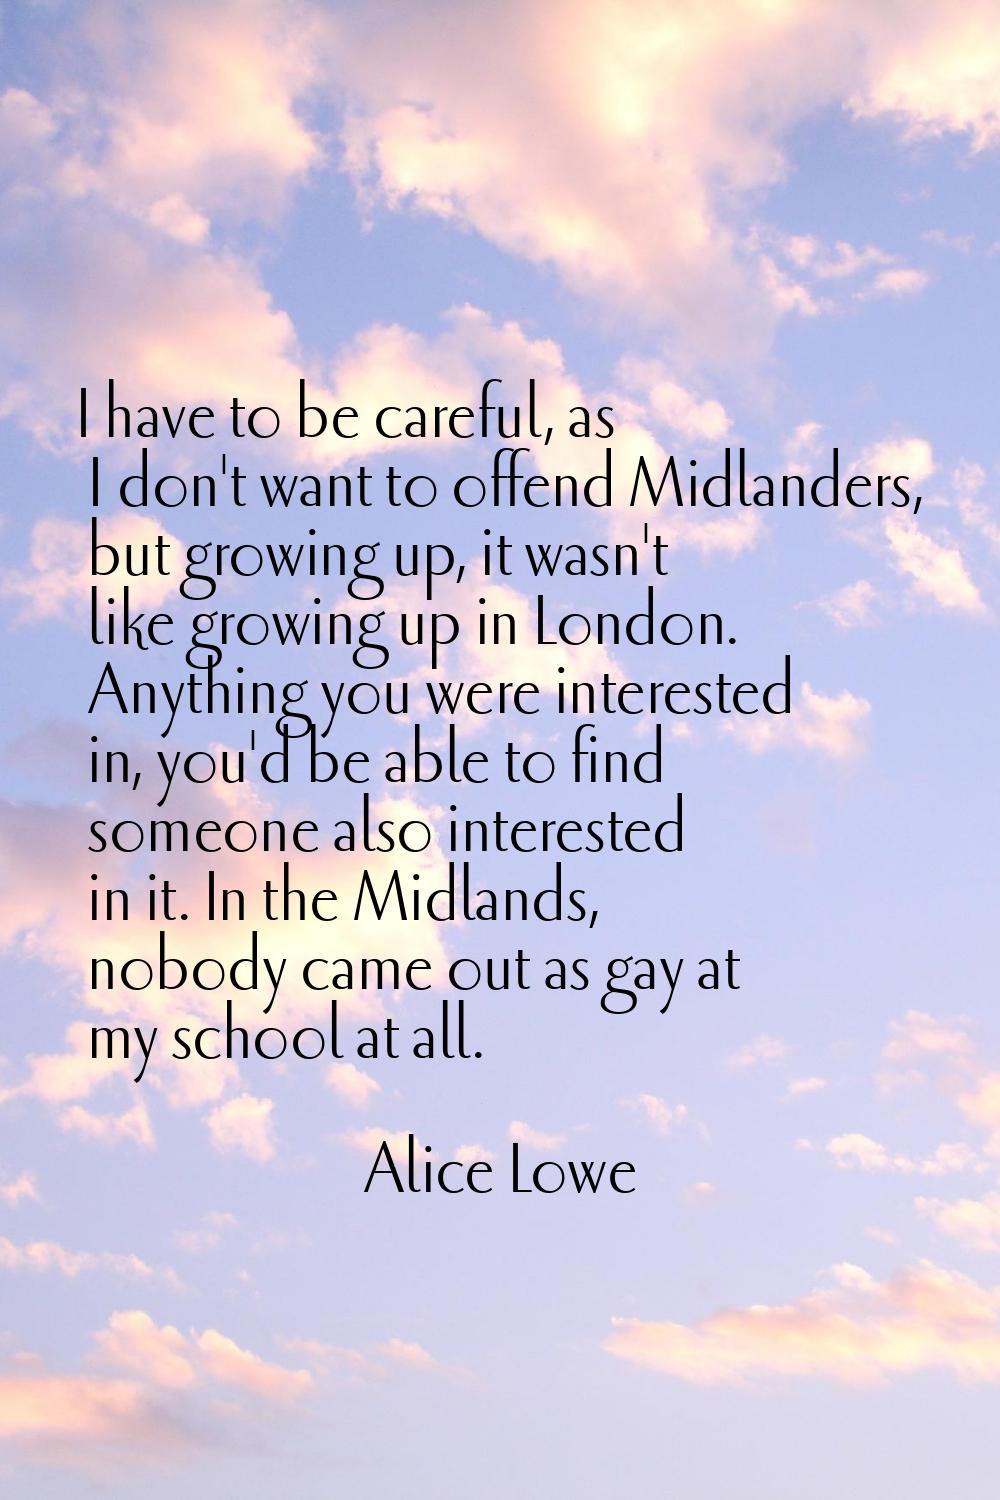 I have to be careful, as I don't want to offend Midlanders, but growing up, it wasn't like growing 